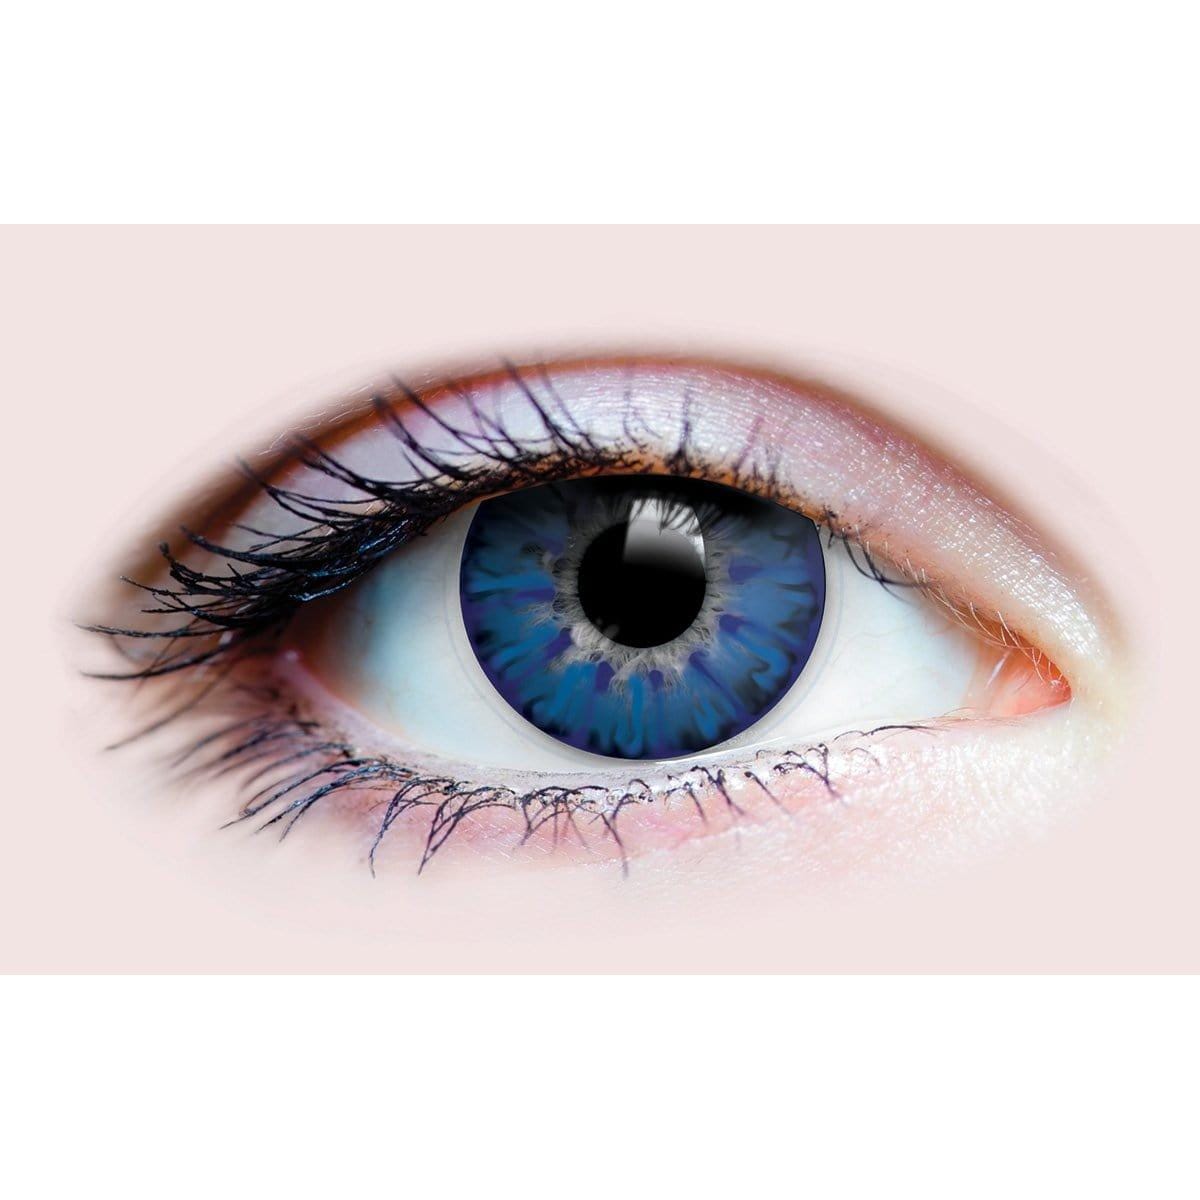 Buy Costume Accessories Enchanted azur contact lenses, 3 months usage sold at Party Expert